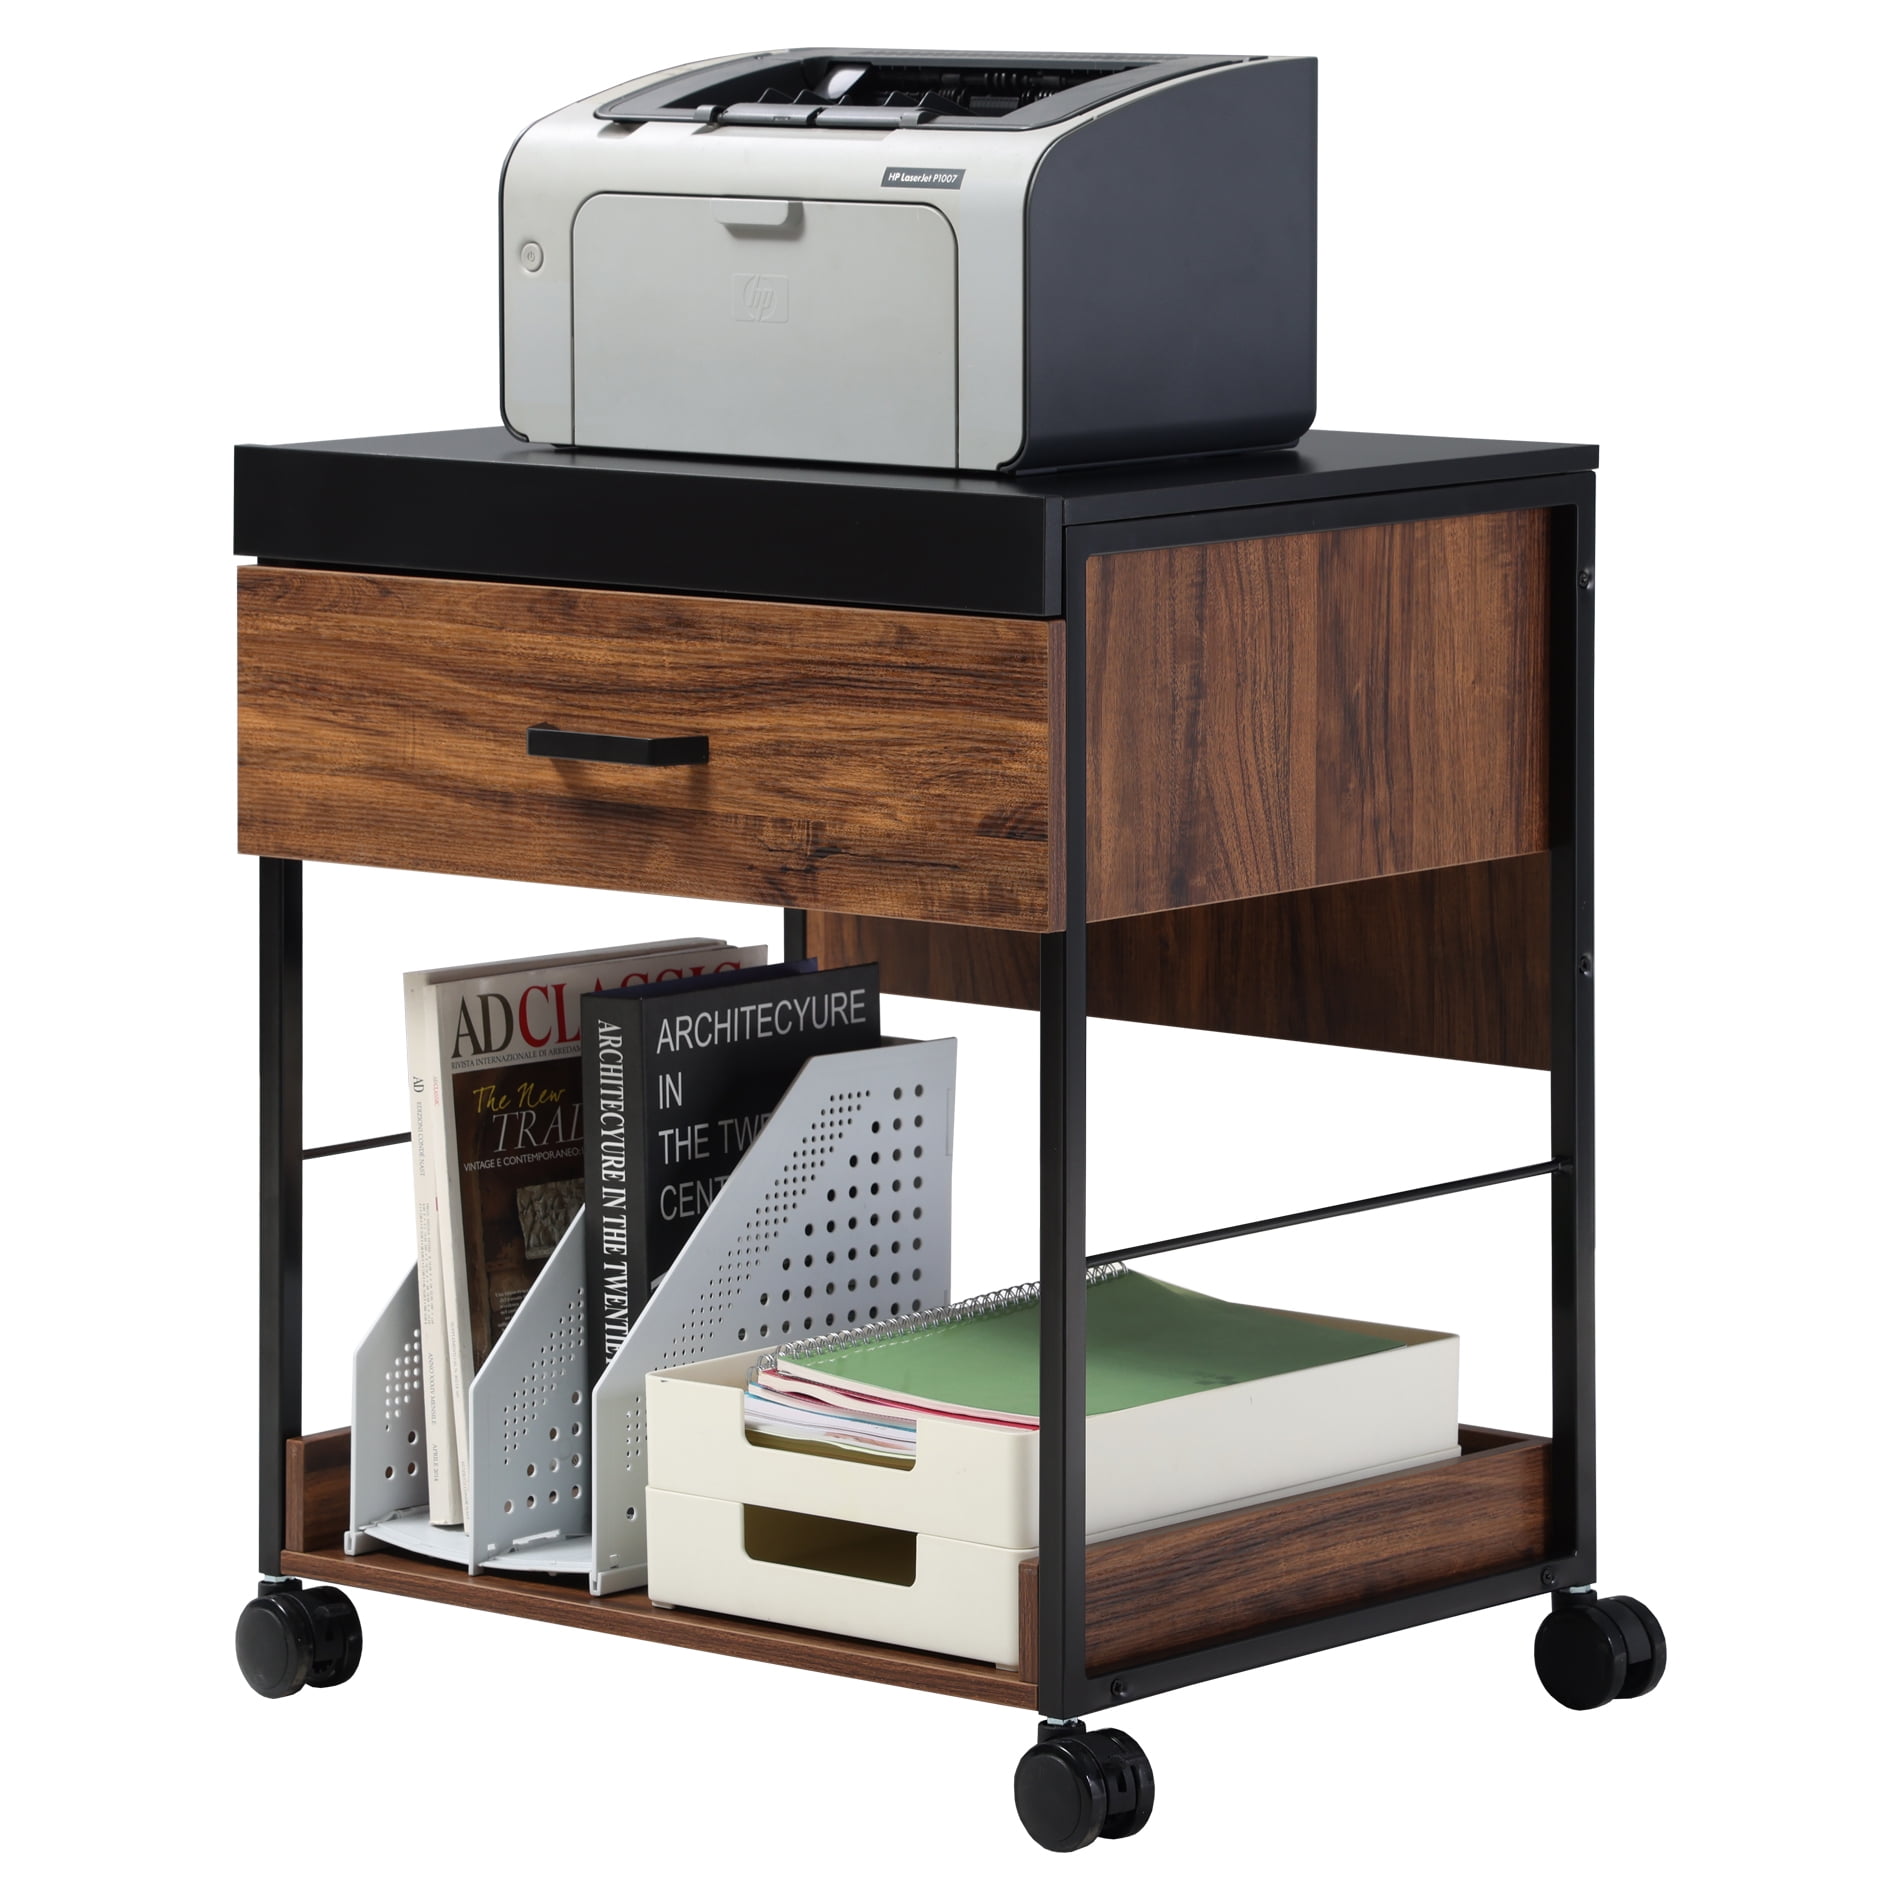 Faviu Home Supplies Printer Stand Wide Range Of Application for Home